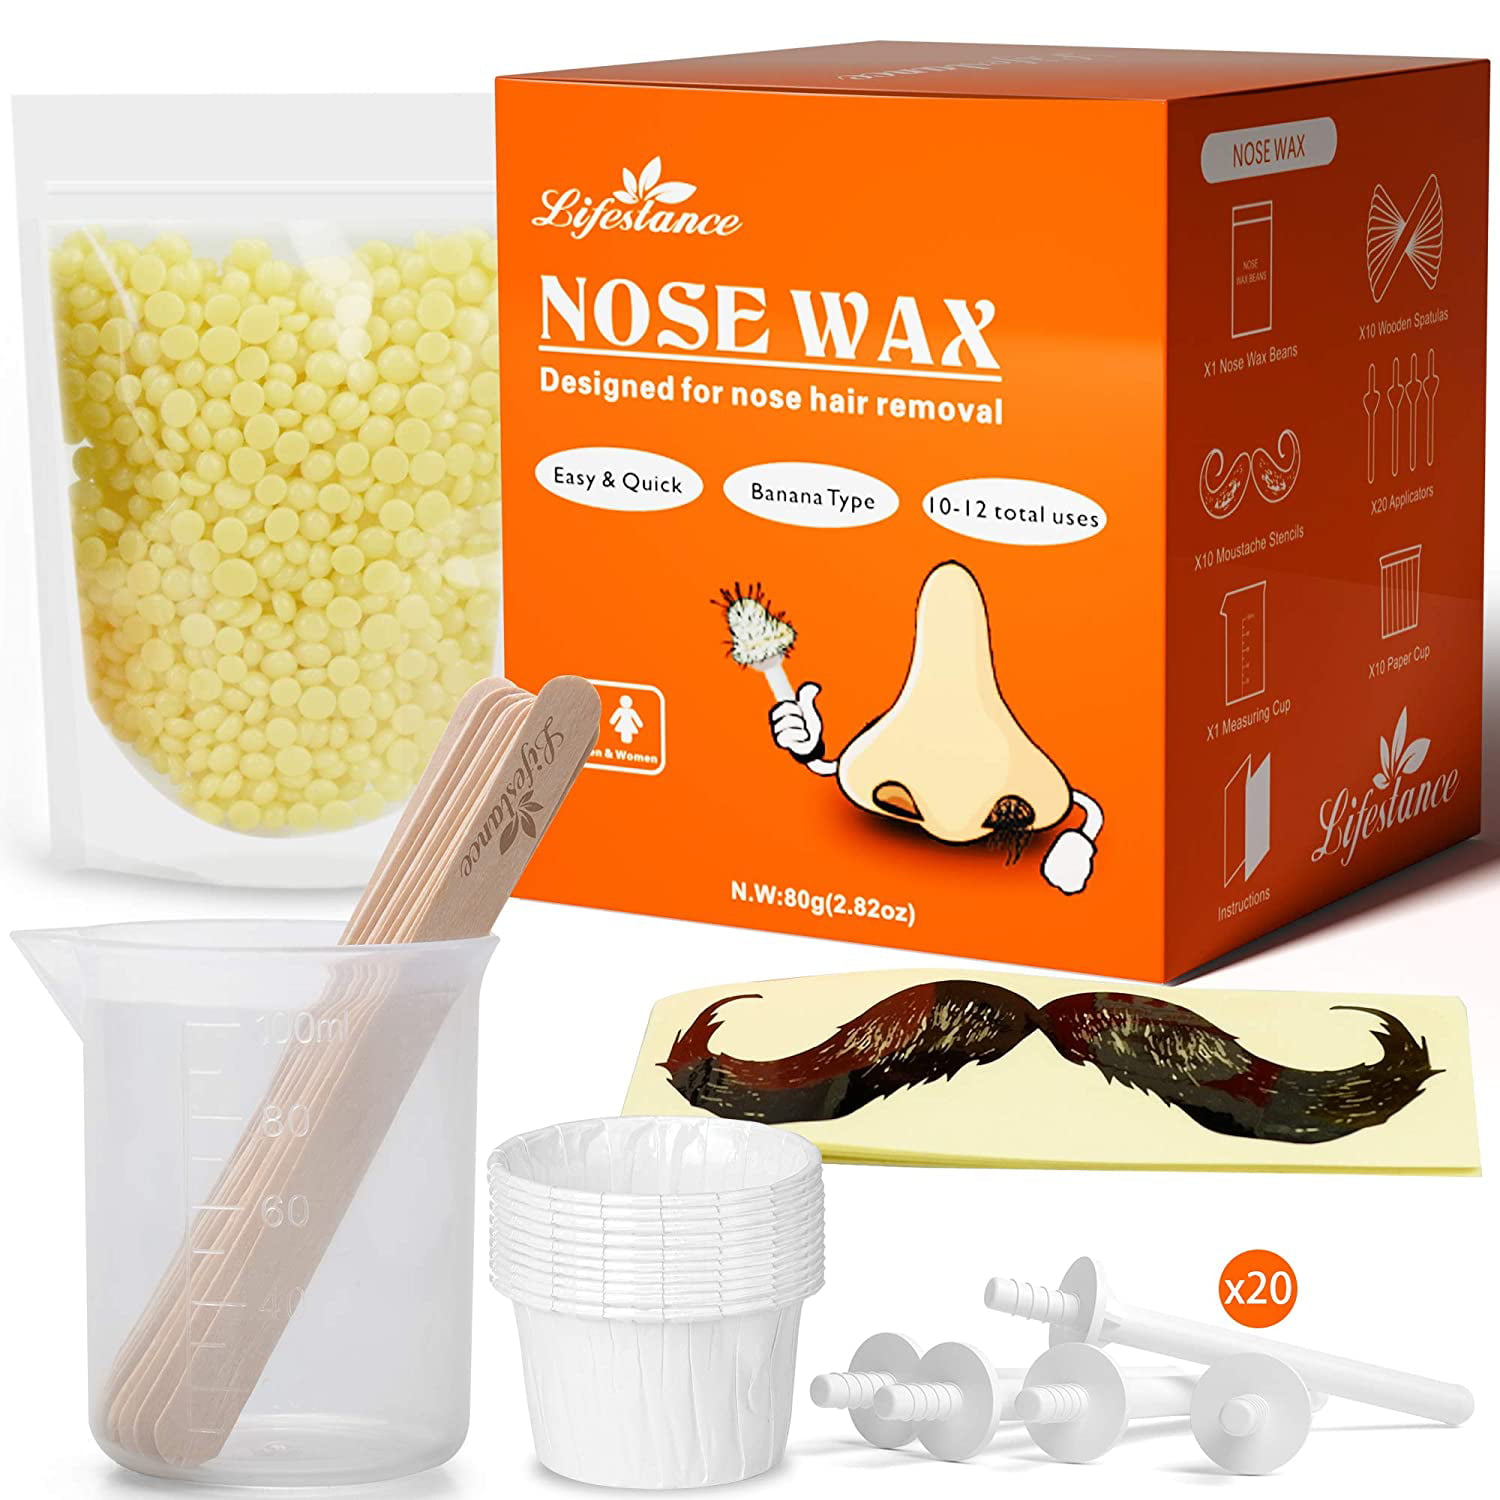 Lifestance Nose Wax Kit, Nose Hair Wax, Nose Wax for Quick & Easy Hair  Removal, Painless Nose Hair Waxing Kit for Men Women (15-20 Times Usage ) -  